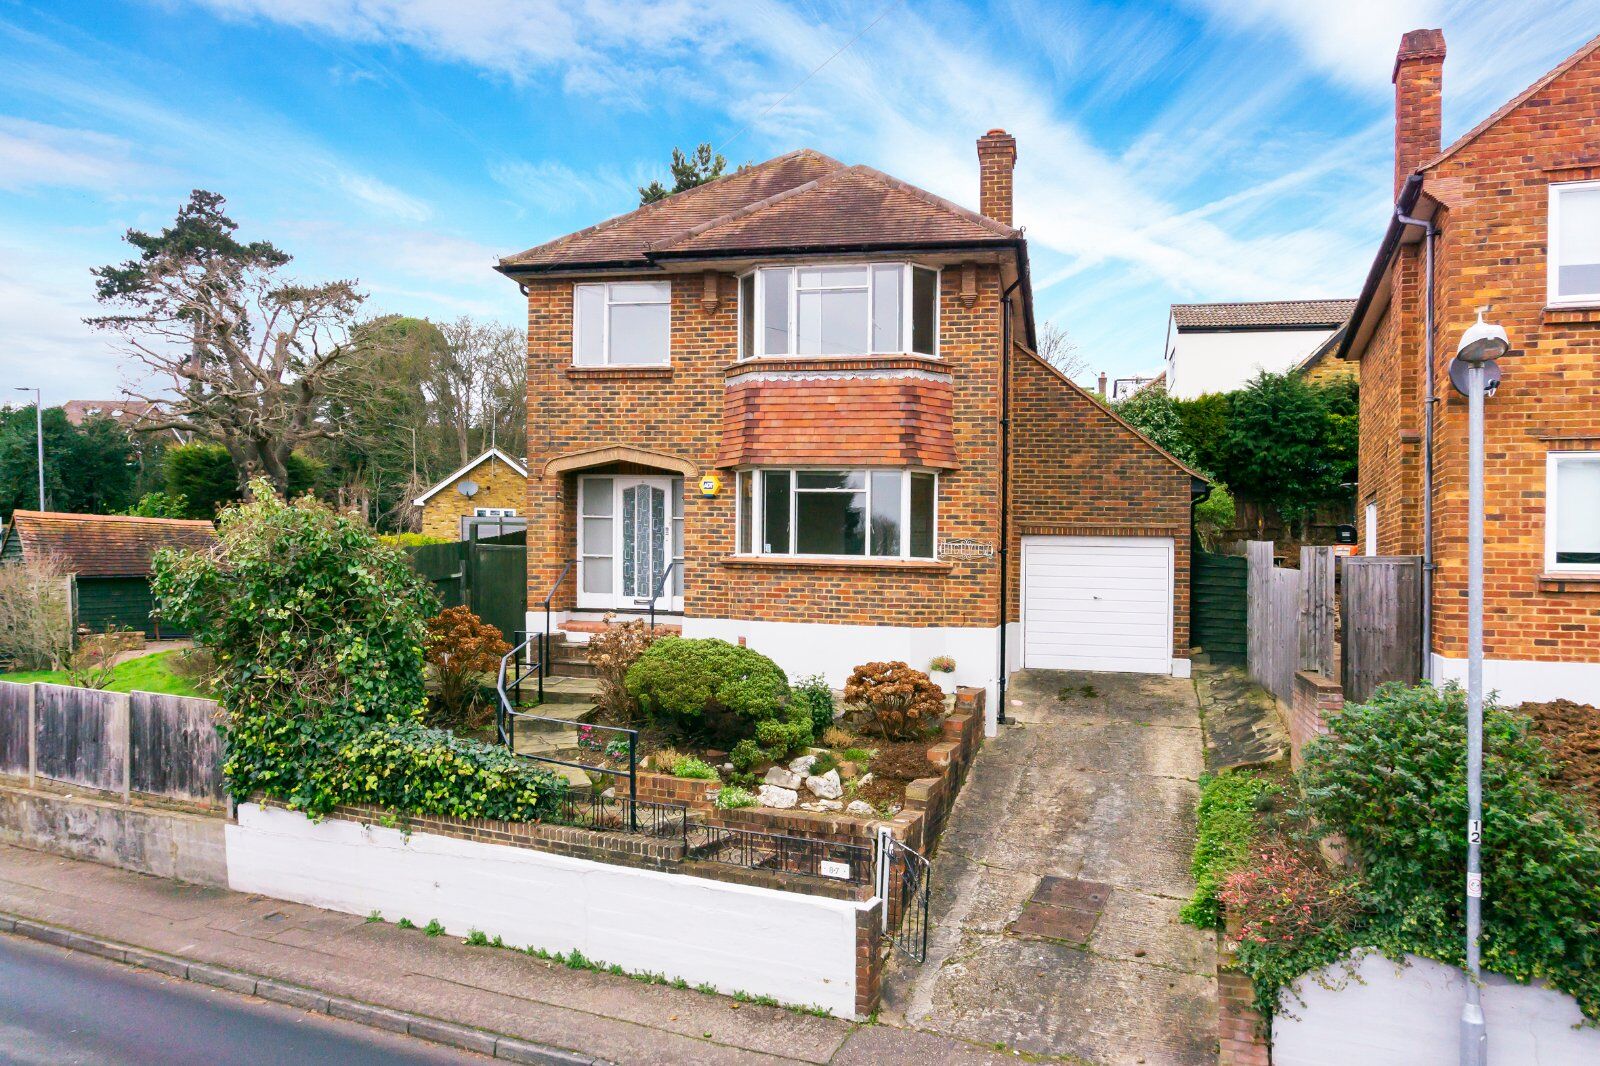 3 bedroom detached house for sale Goldings Road, Loughton, IG10, main image